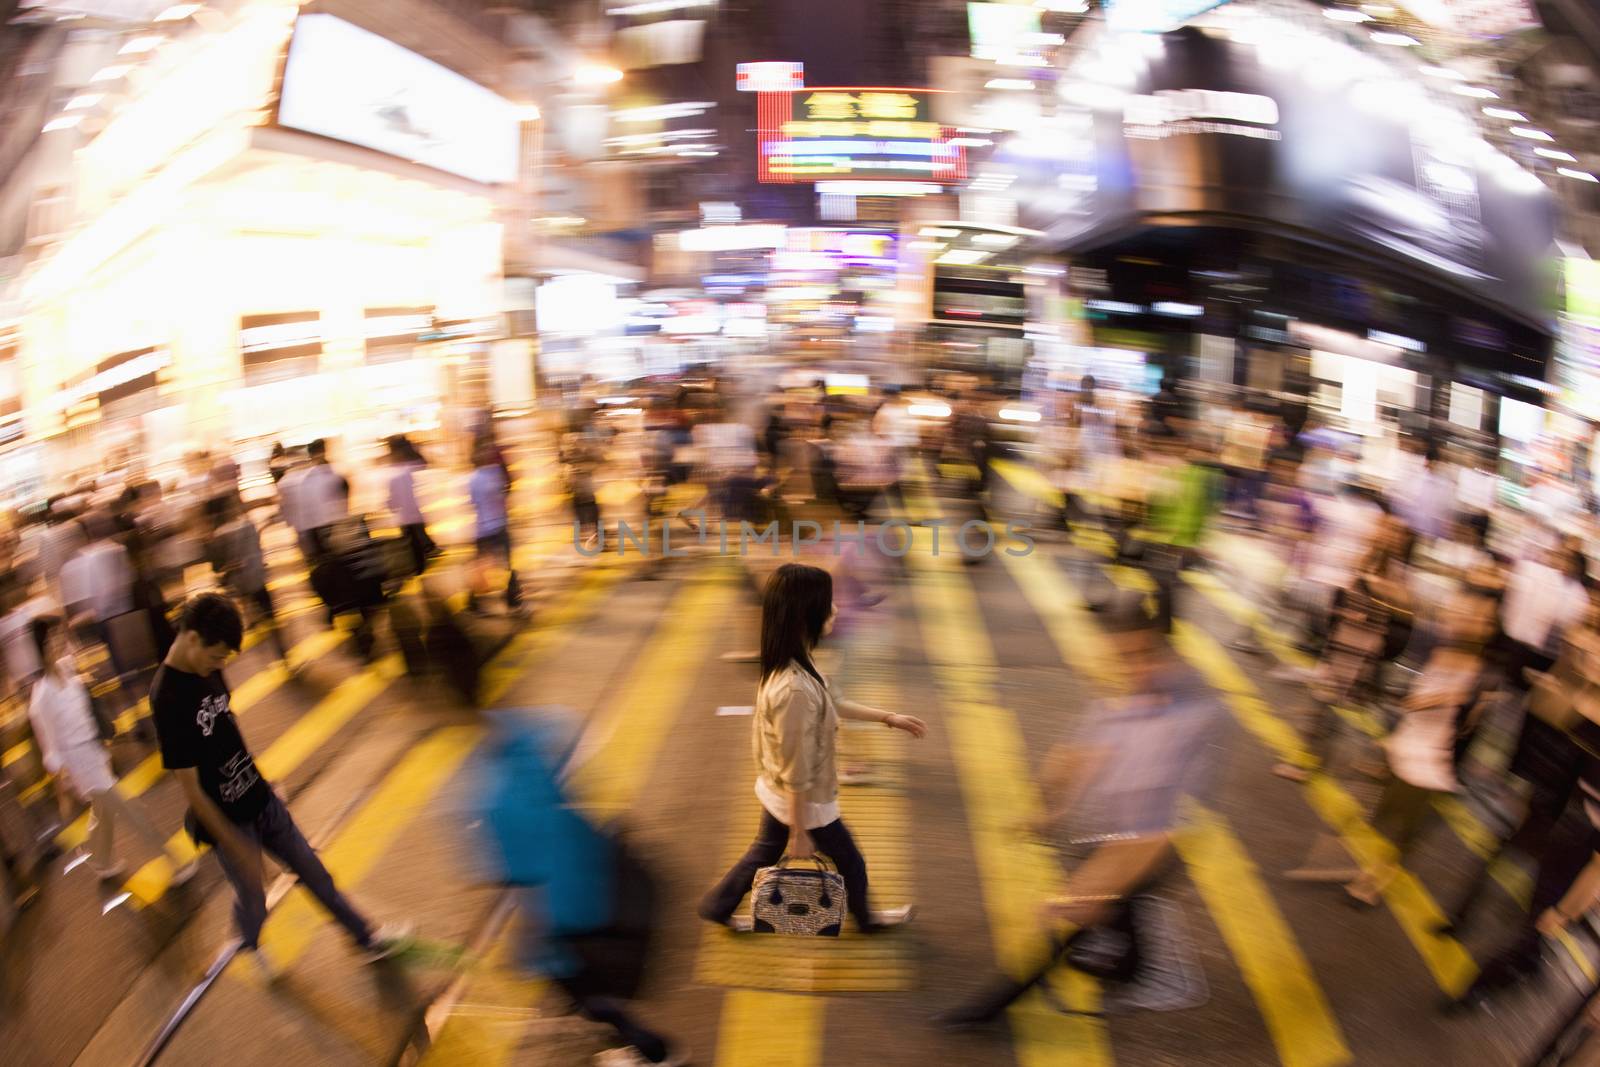 Elevated view of a pedestrian crossing a road in central Hong Kong
China